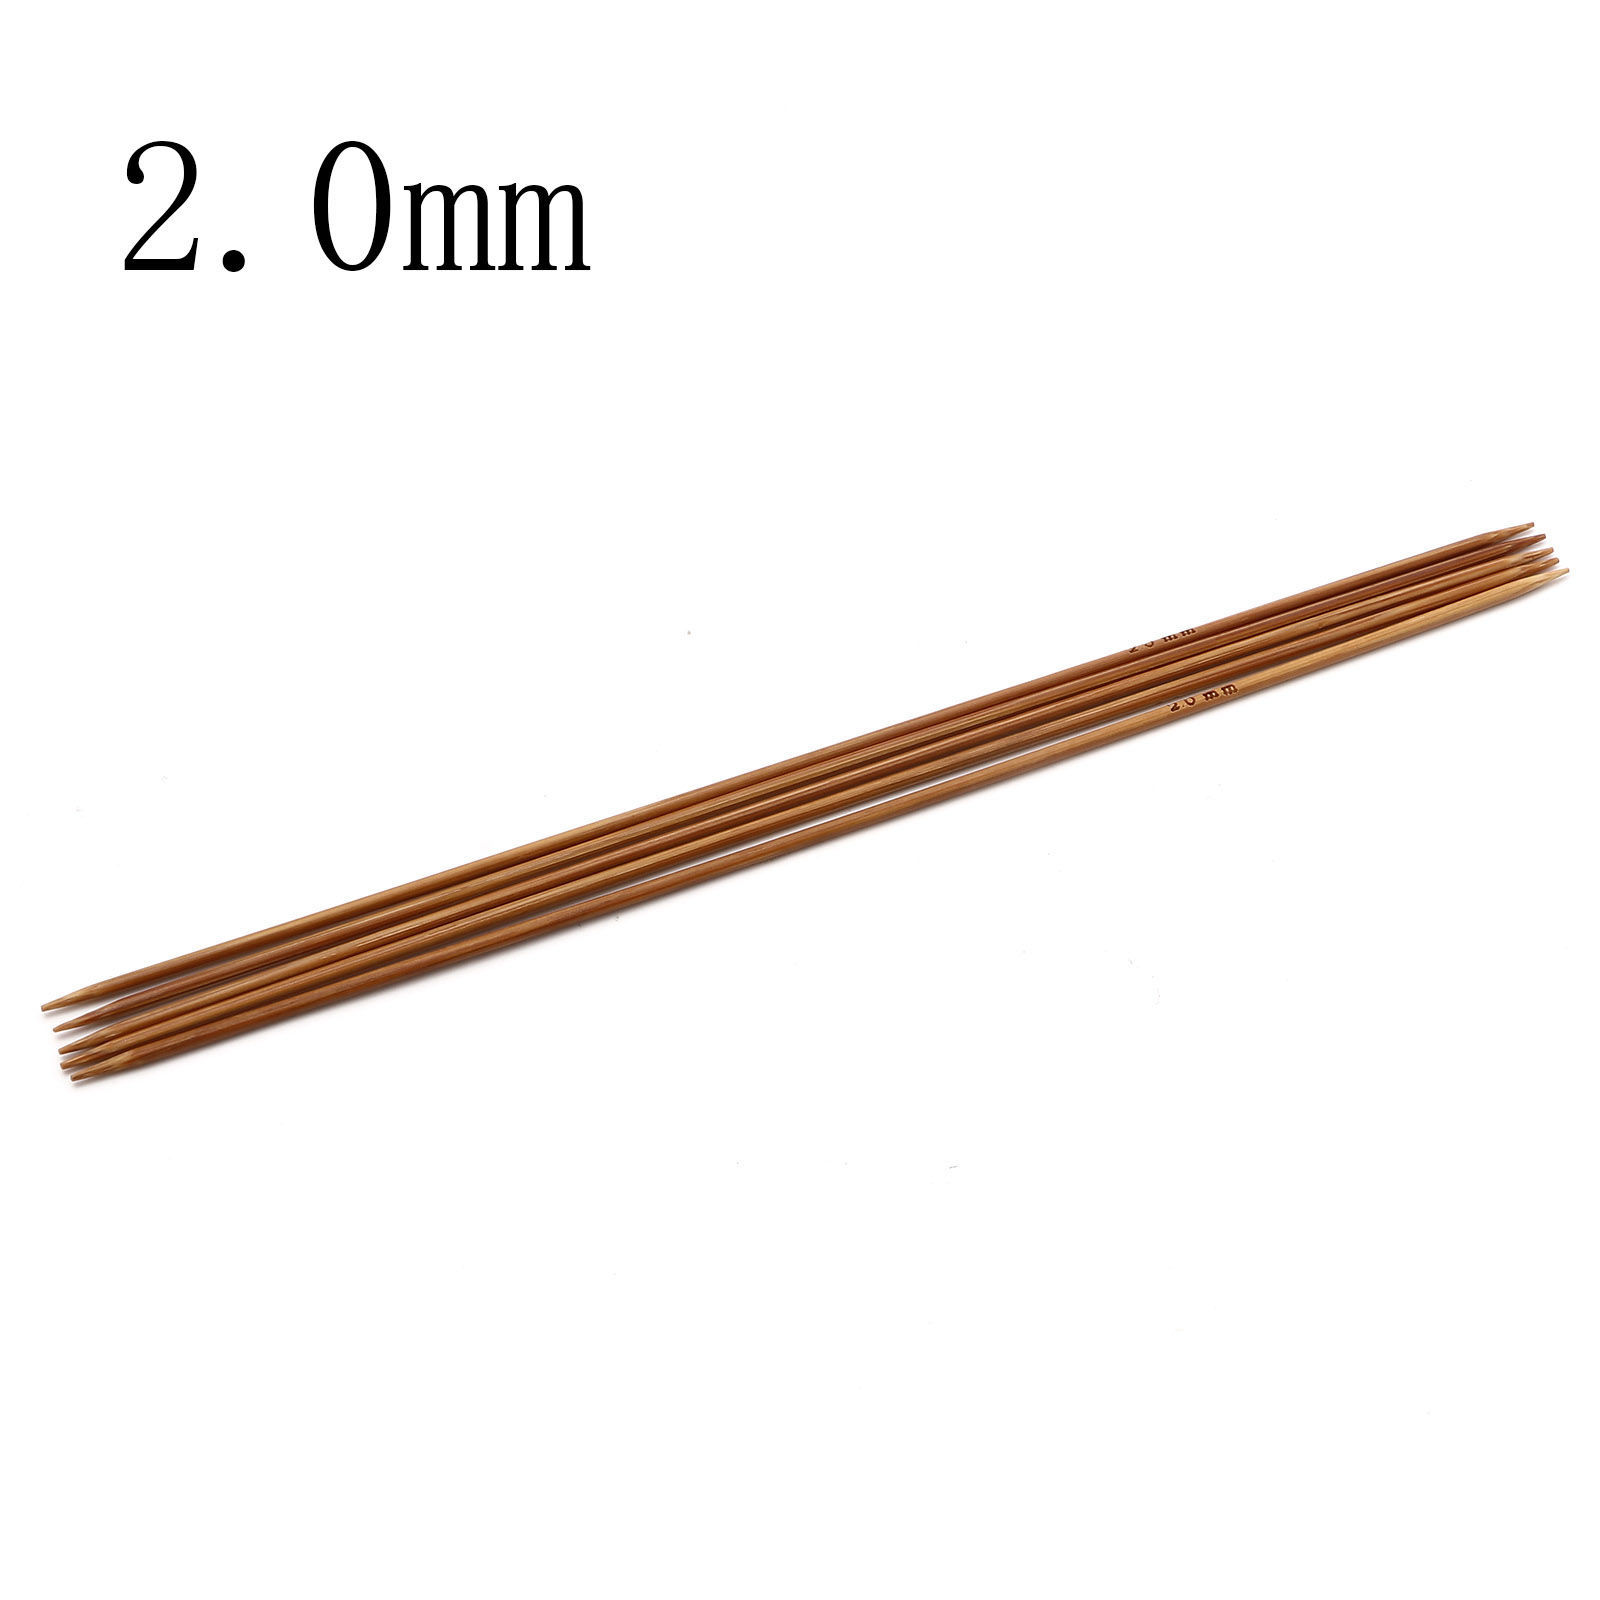 Picture of (US3 3.25mm) Bamboo Double Pointed Knitting Needles Brown 20cm(7 7/8") long, 5 PCs